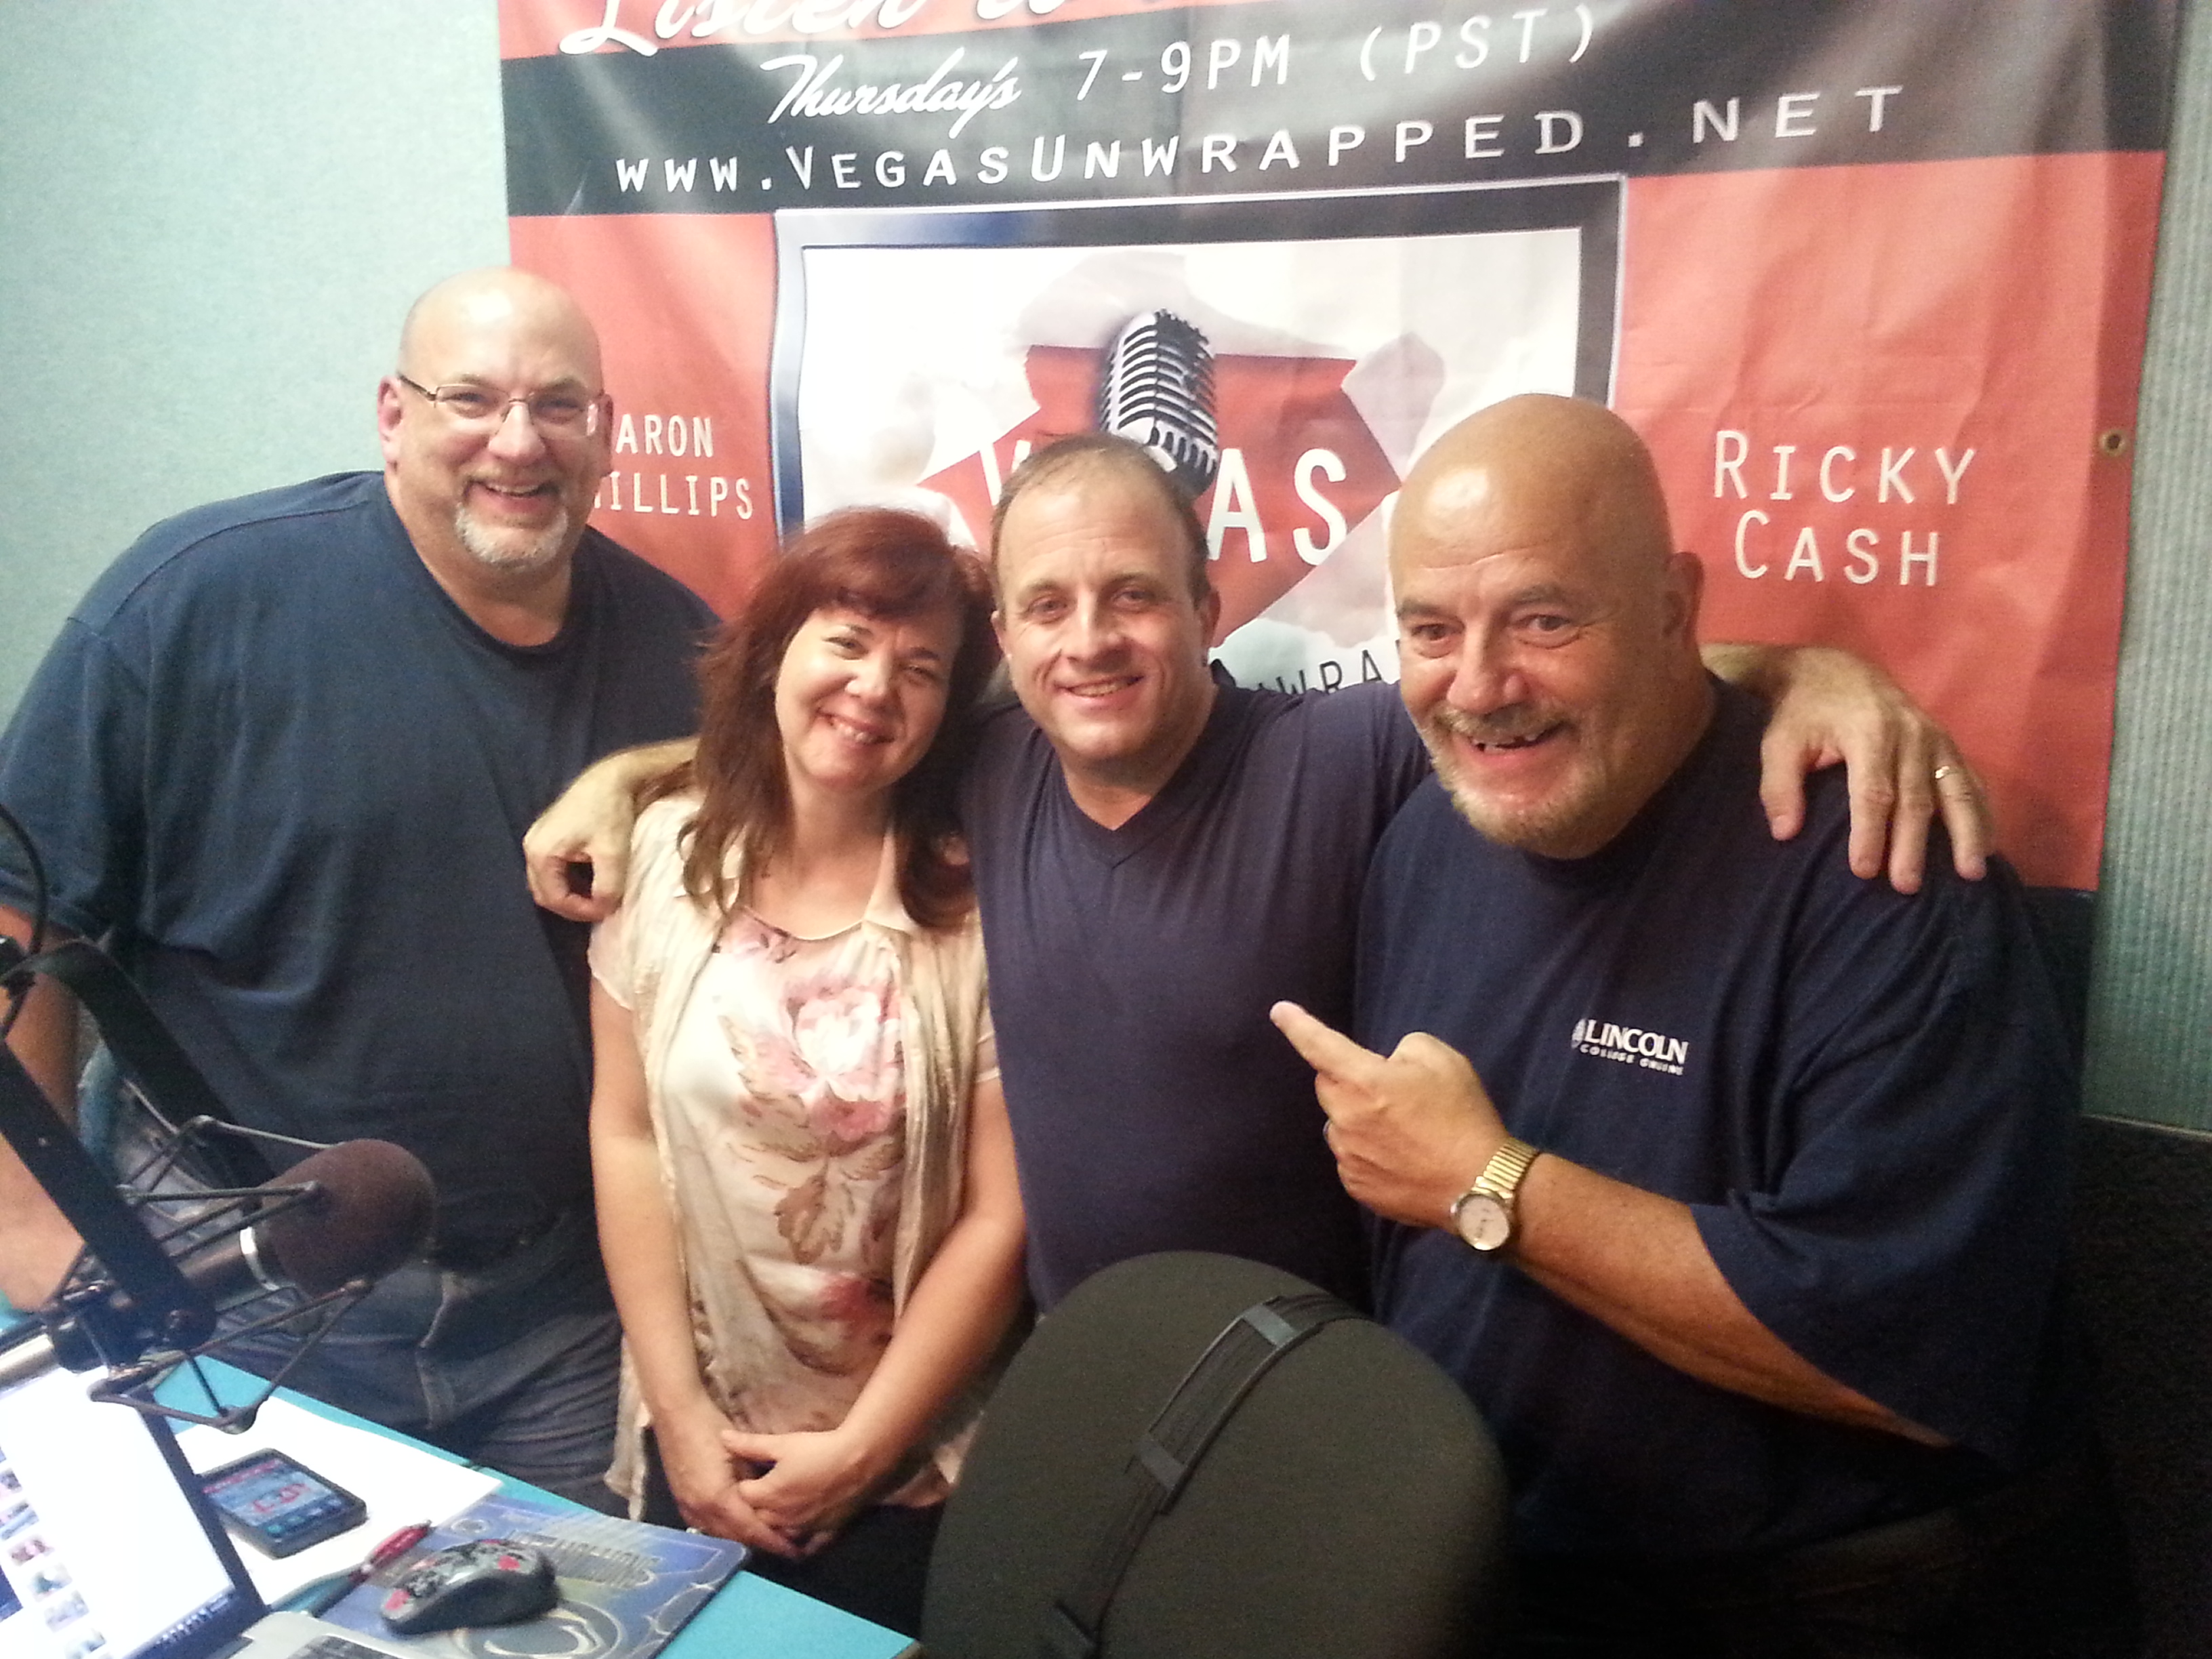 Vegas Unwrapped Radio Show with Aaron Phillips, Ricky Cash the hosts of the show. Catherine Natale & Peter Papageorgiou Center